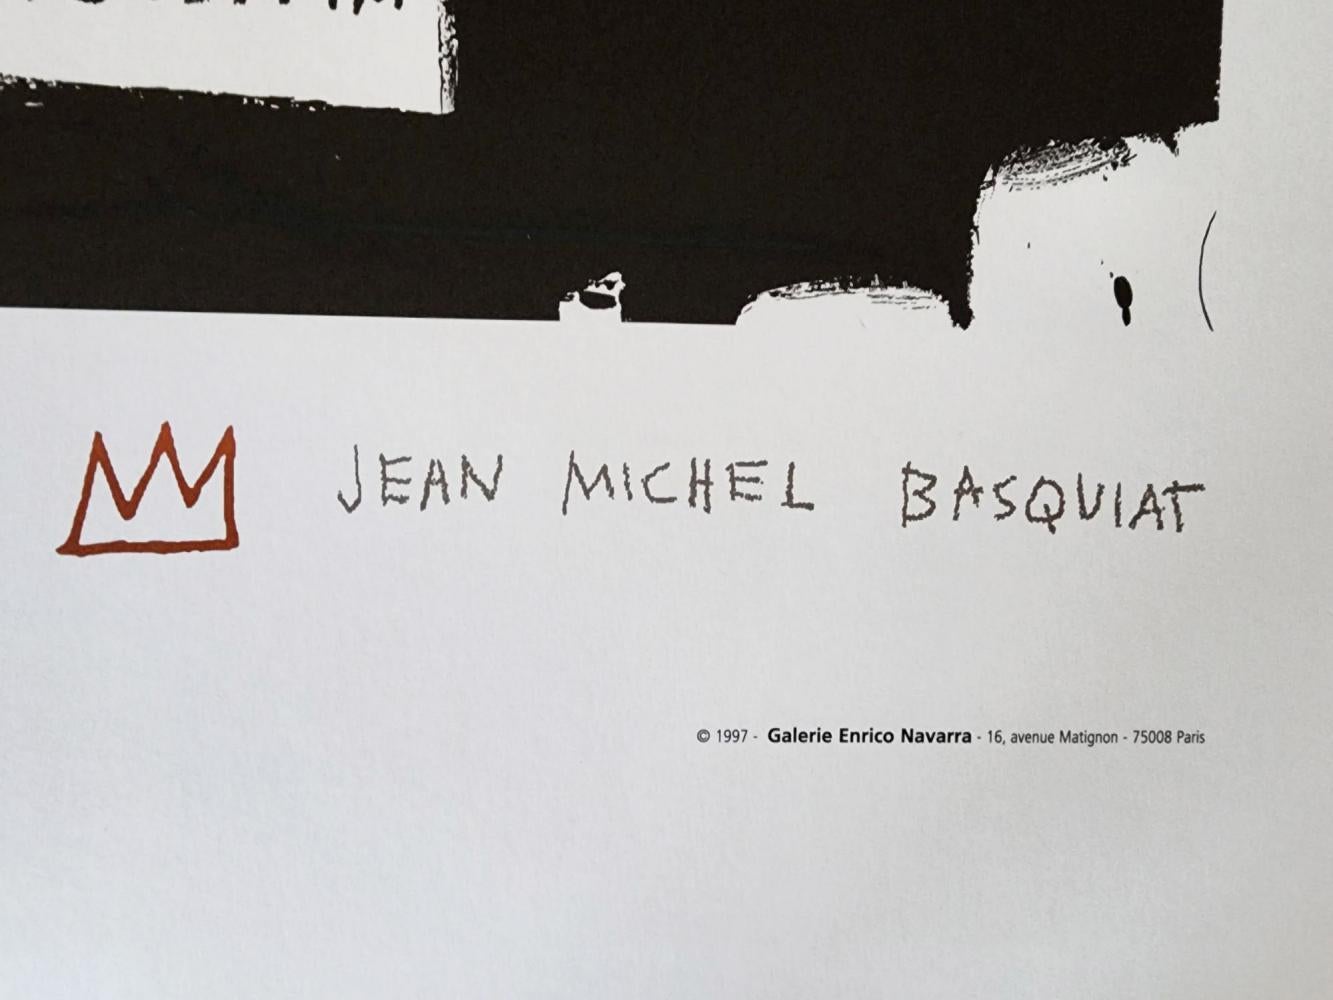 JEAN MICHEL BASQUIAT, 'BIG PAGODA 1997' VERY RARE LIMITED EDITION ESTATE LITHOGR - Print by after Jean-Michel Basquiat